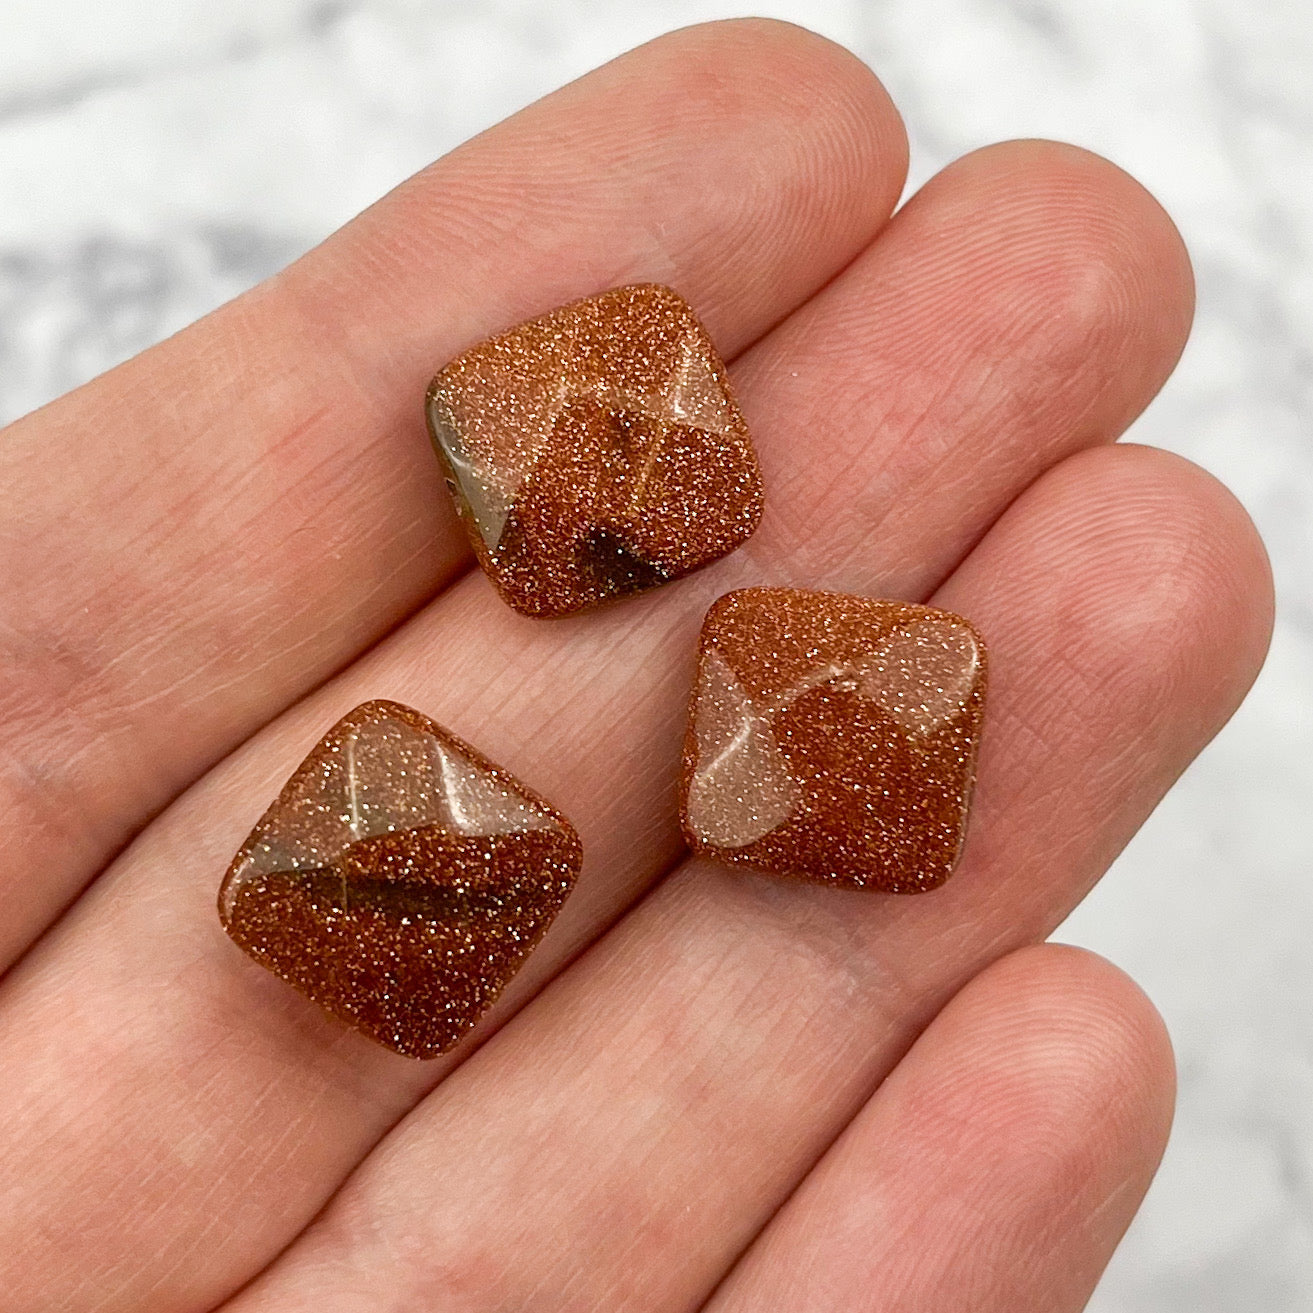 12mm x 12mm Copper Goldstone Faceted Square Focal Bead Pack (3 Beads)